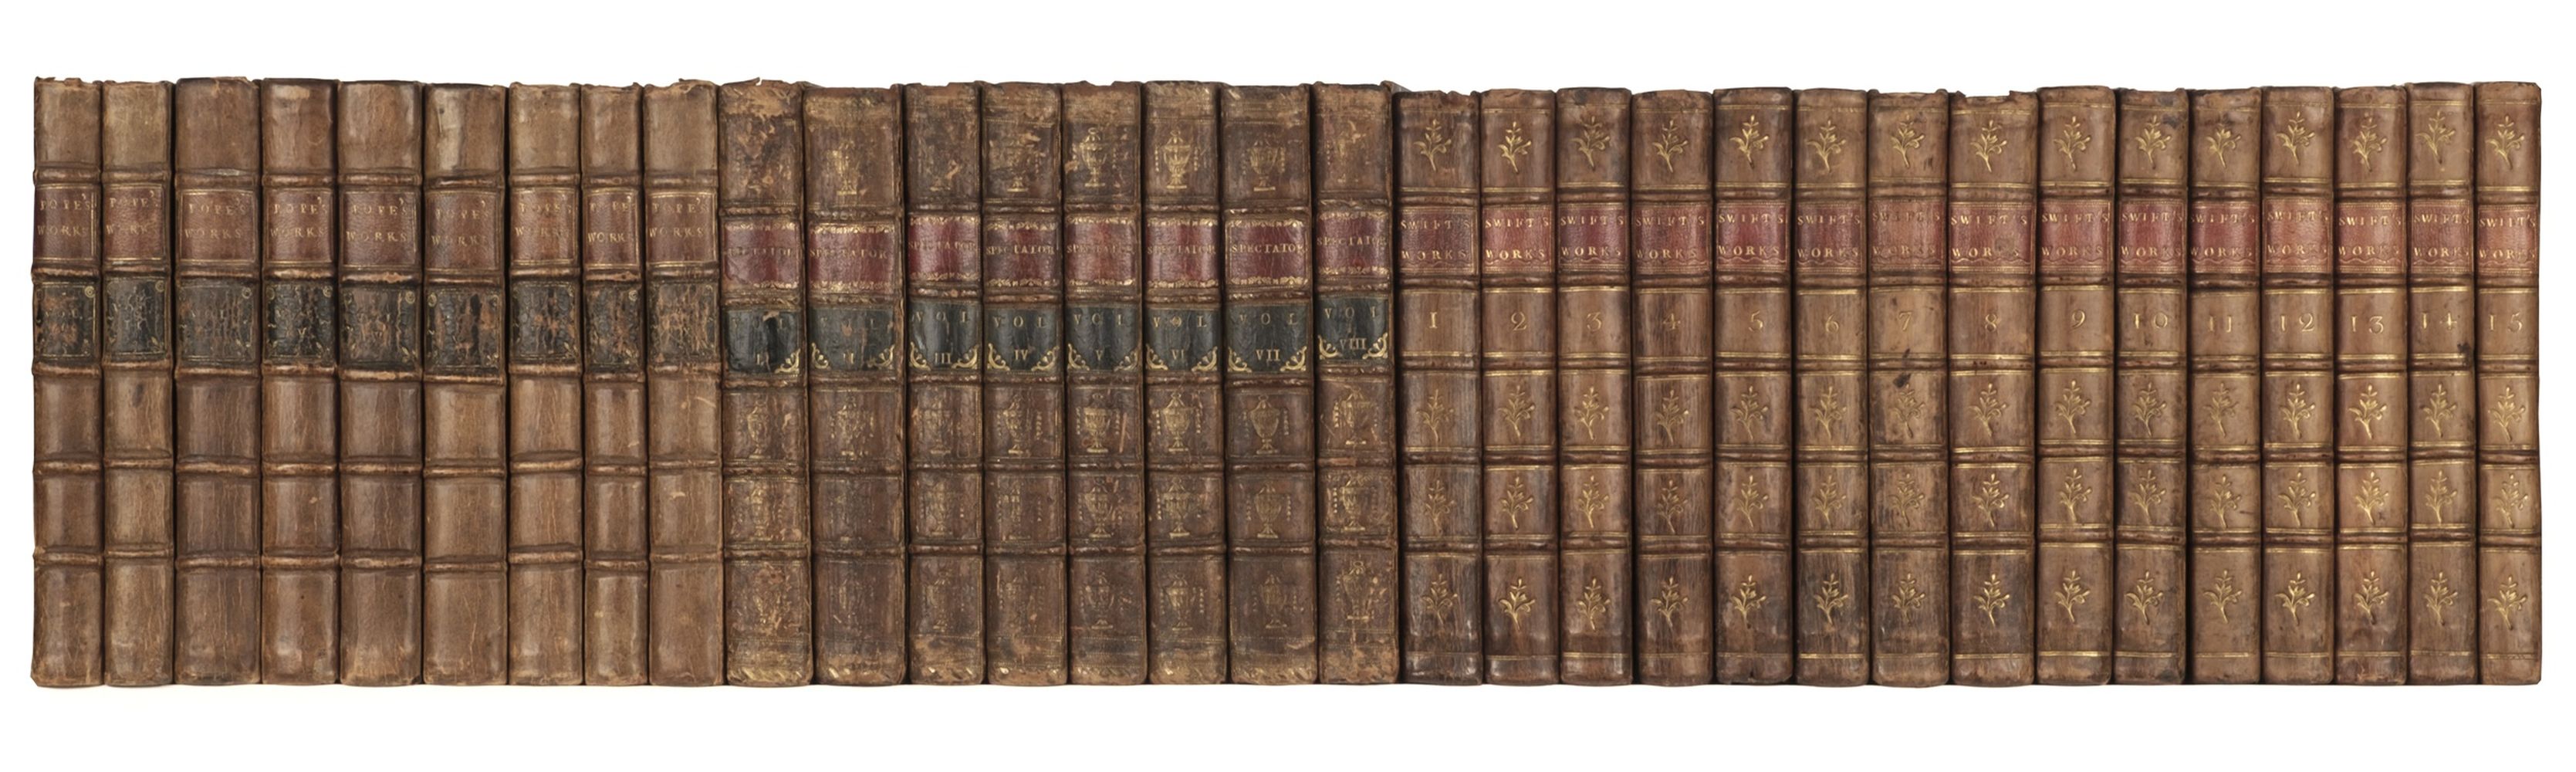 Pope (Alexander). The Works, 9 volumes, 1753, together with Swift, Works, 1774, & Spectator